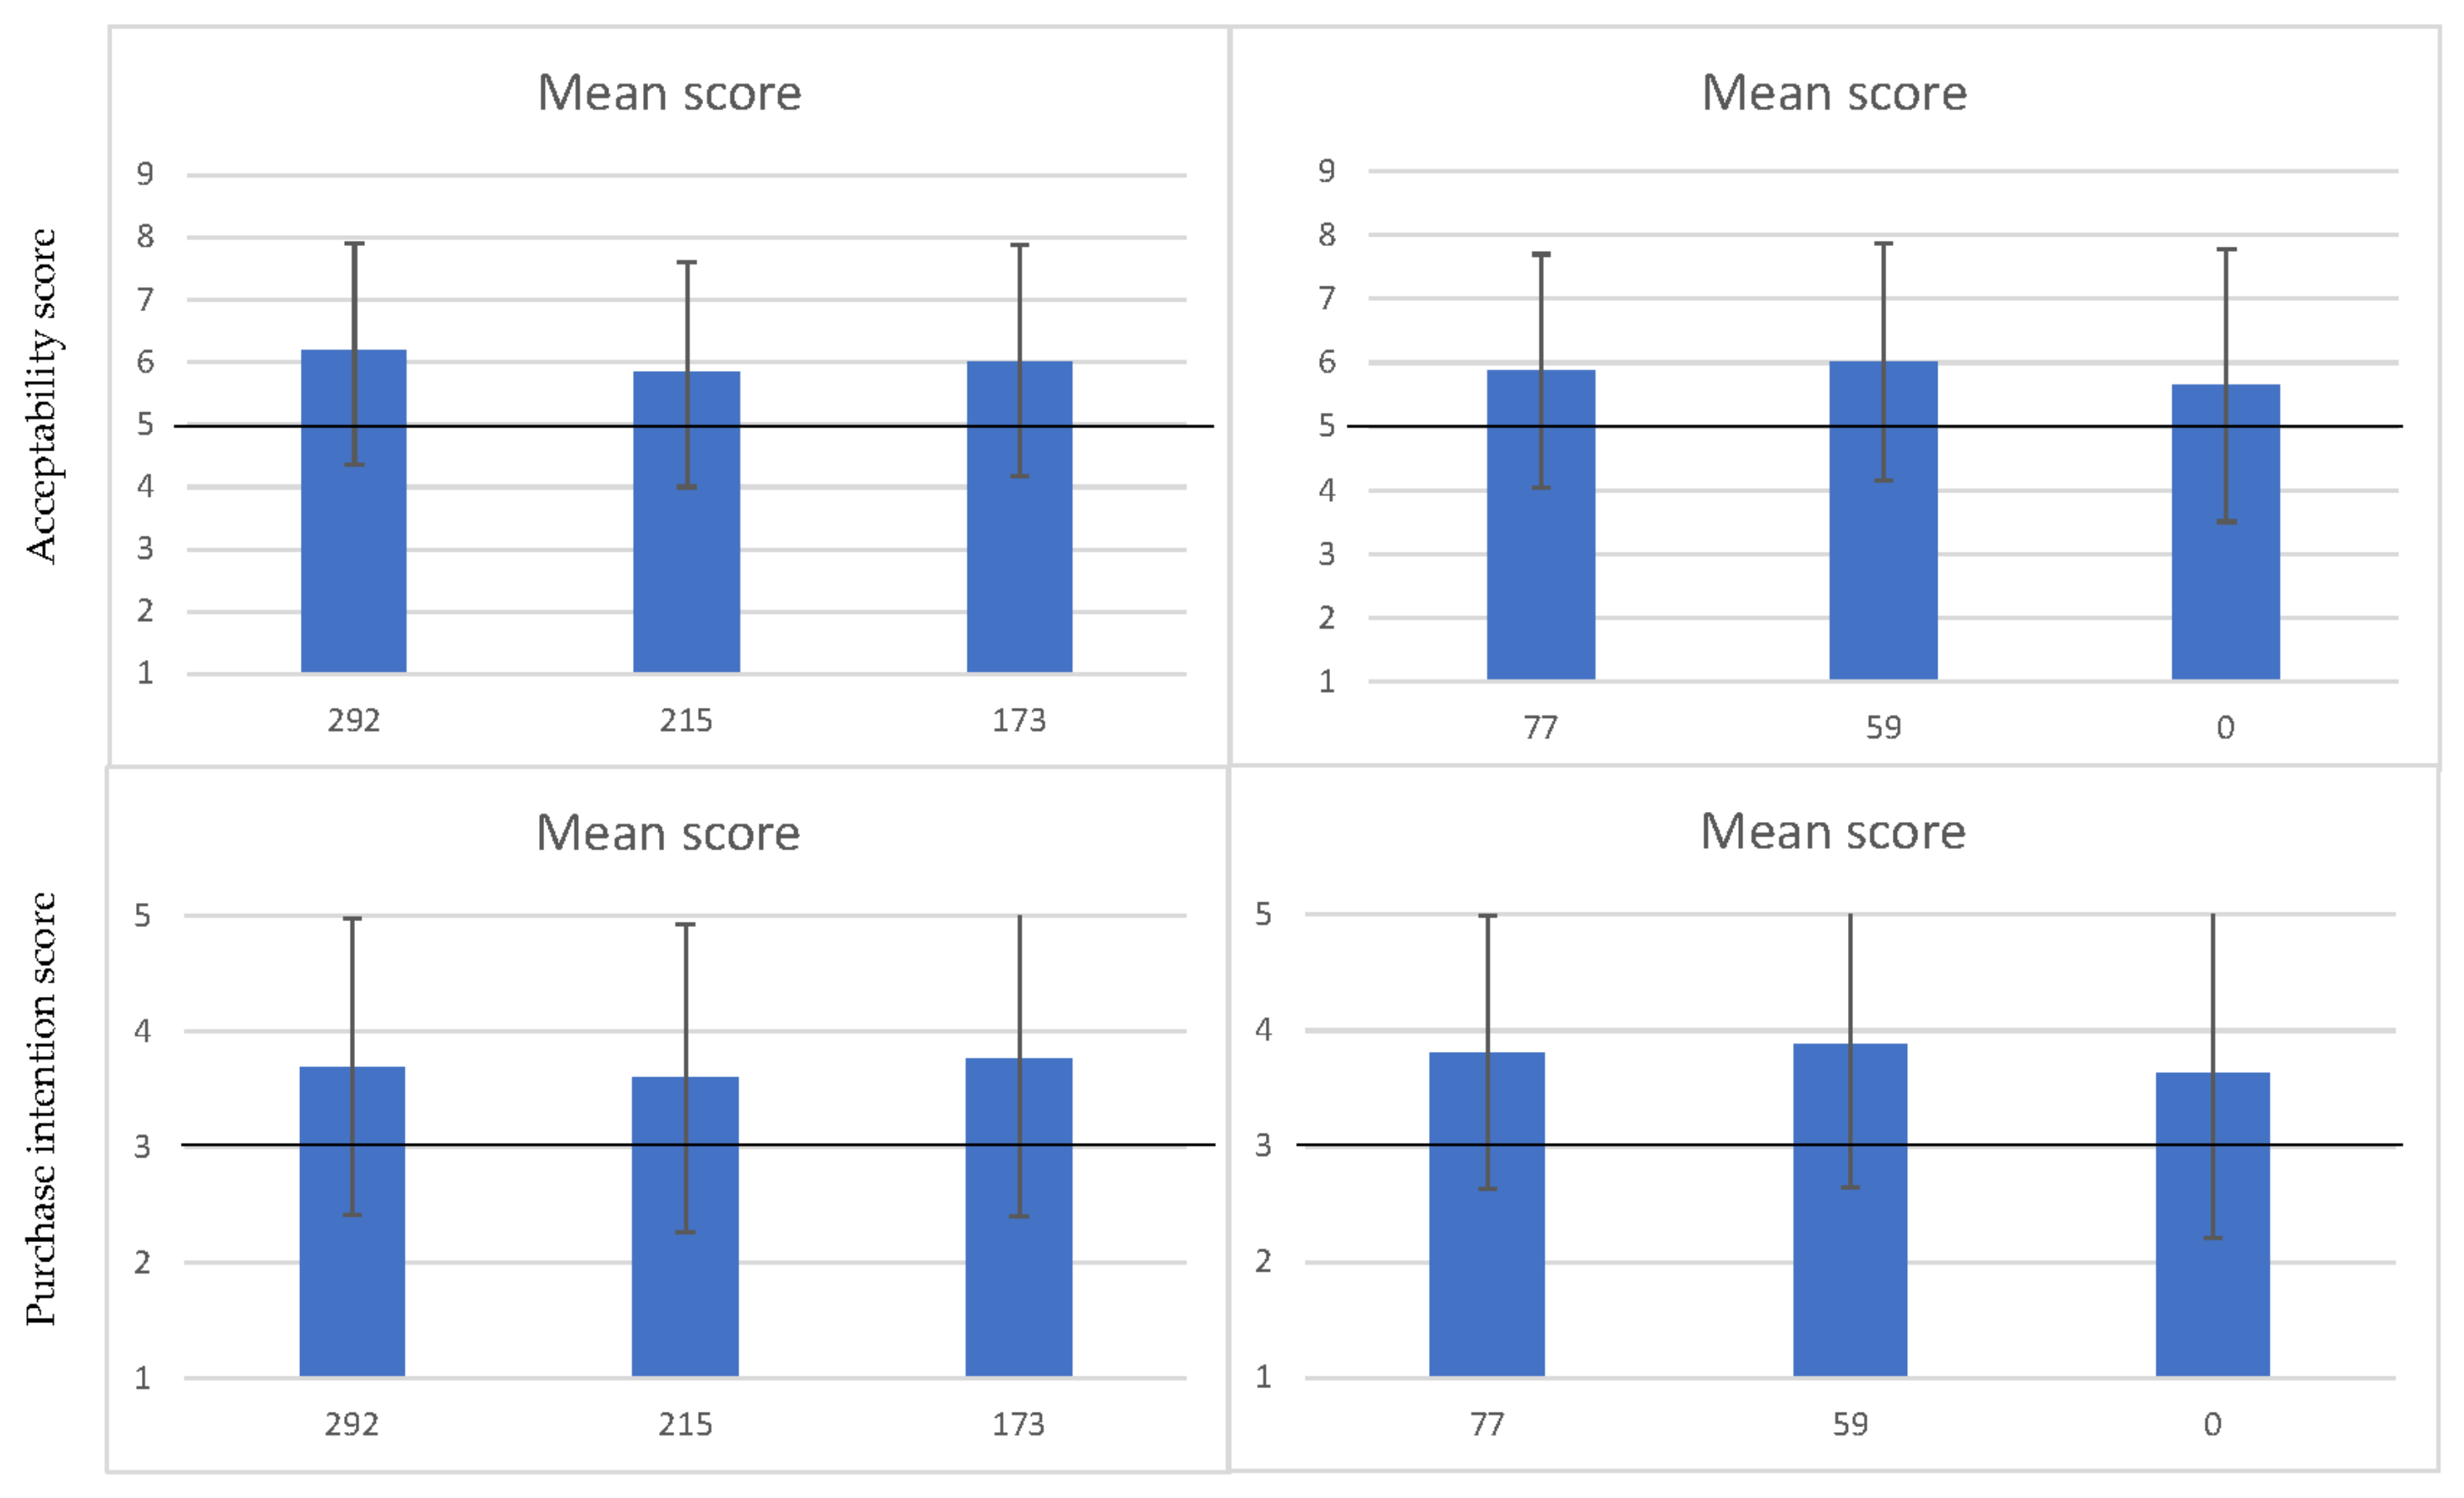 2.1 Acceptability of Scores